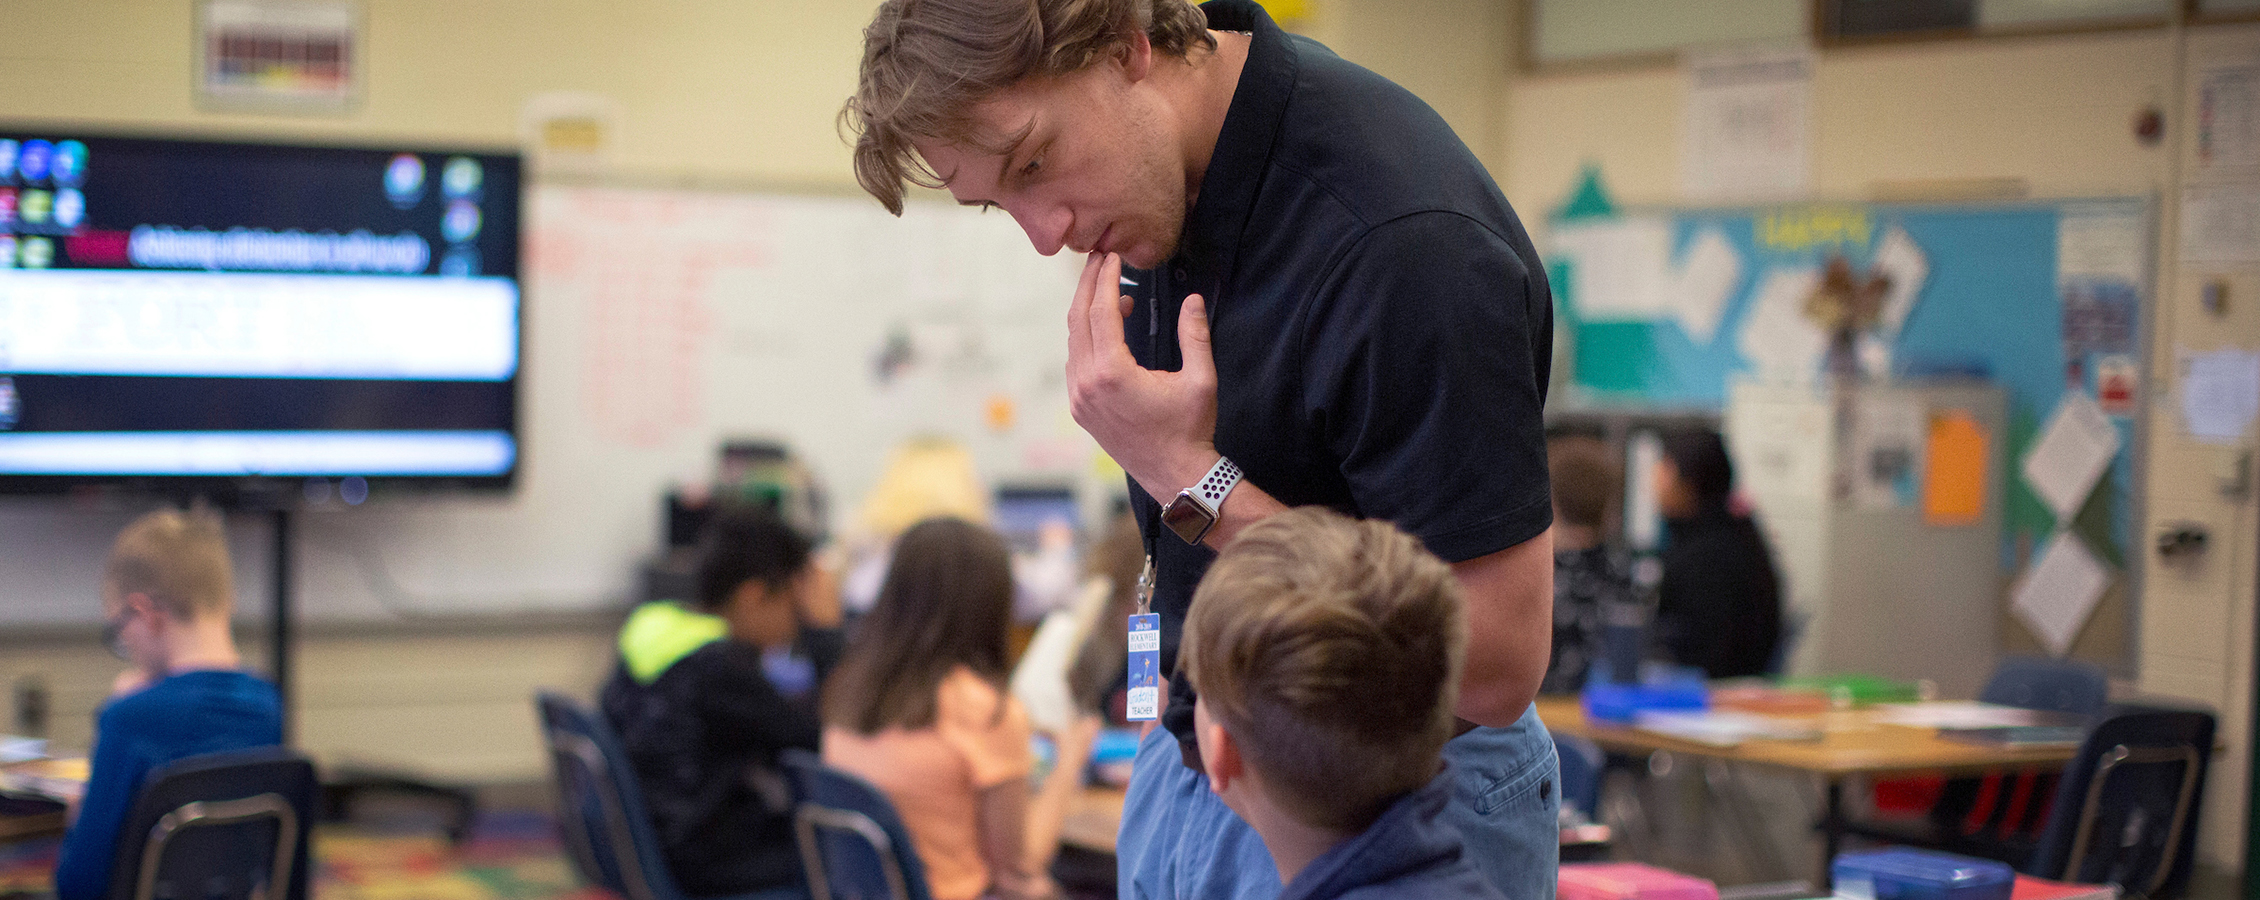 Male teacher in an elementary school classroom looks over the shoulder of a student to check their work.